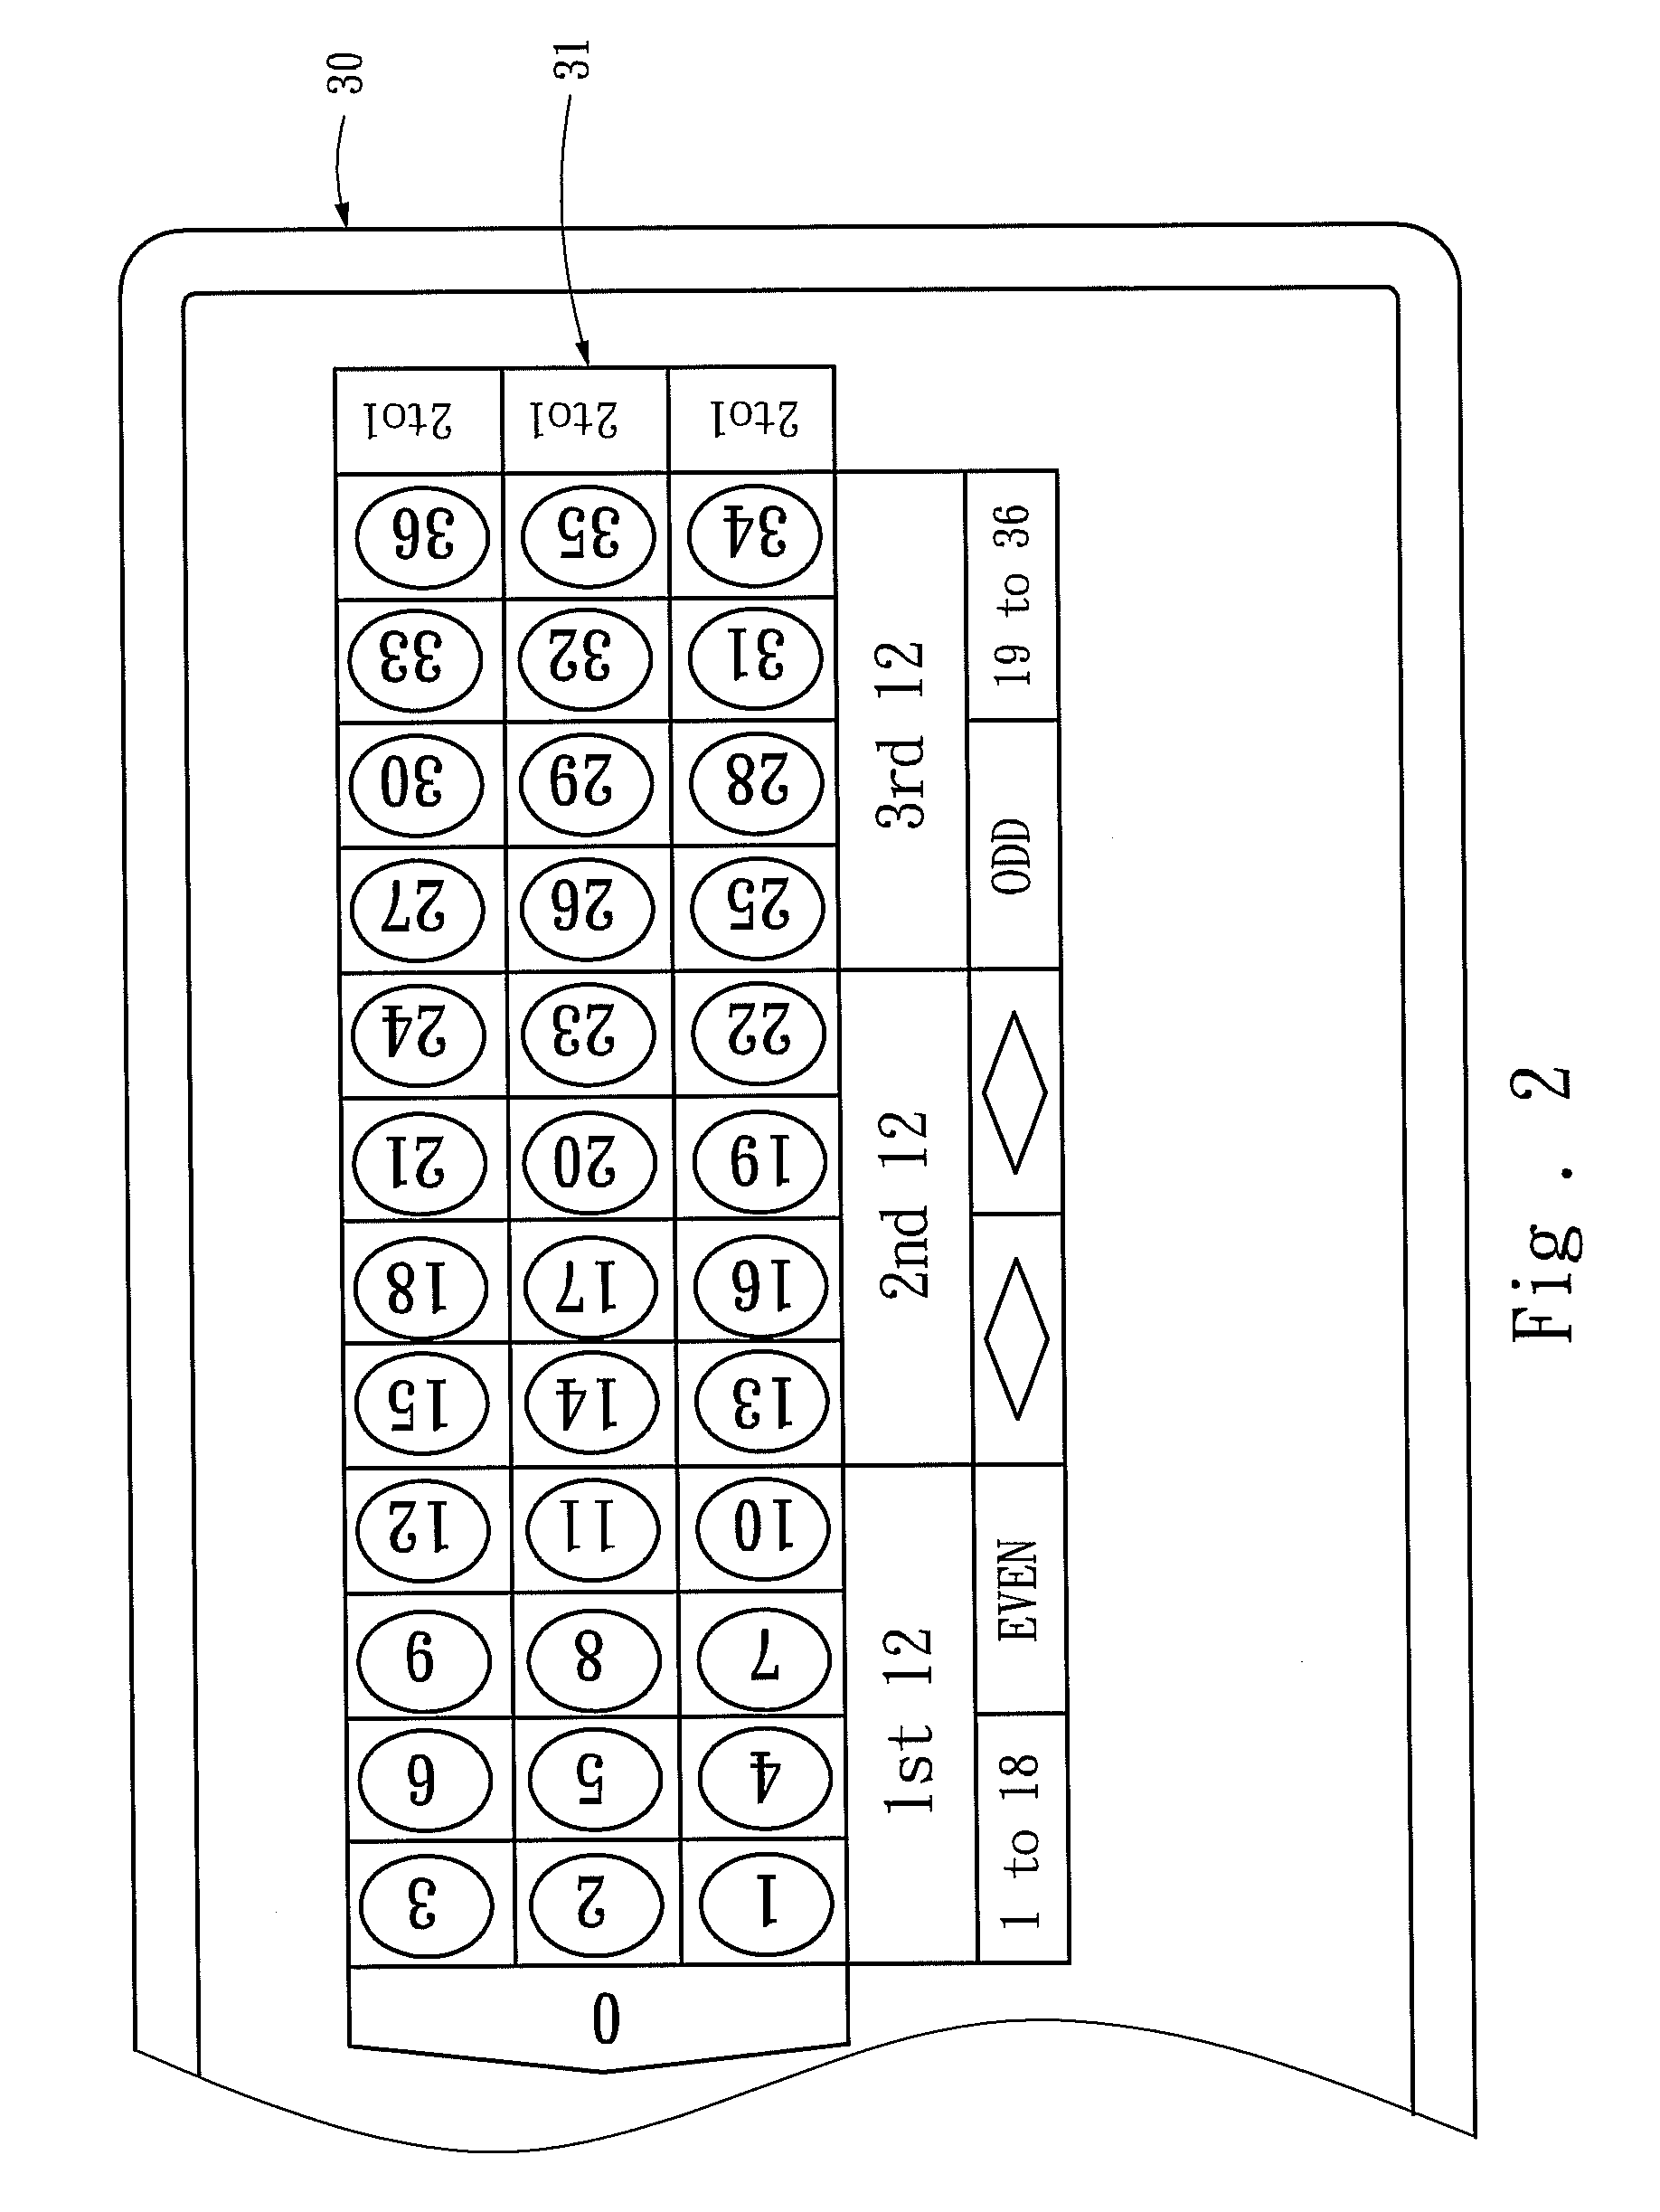 Apparatus for roulette table games with dynamic raised odds